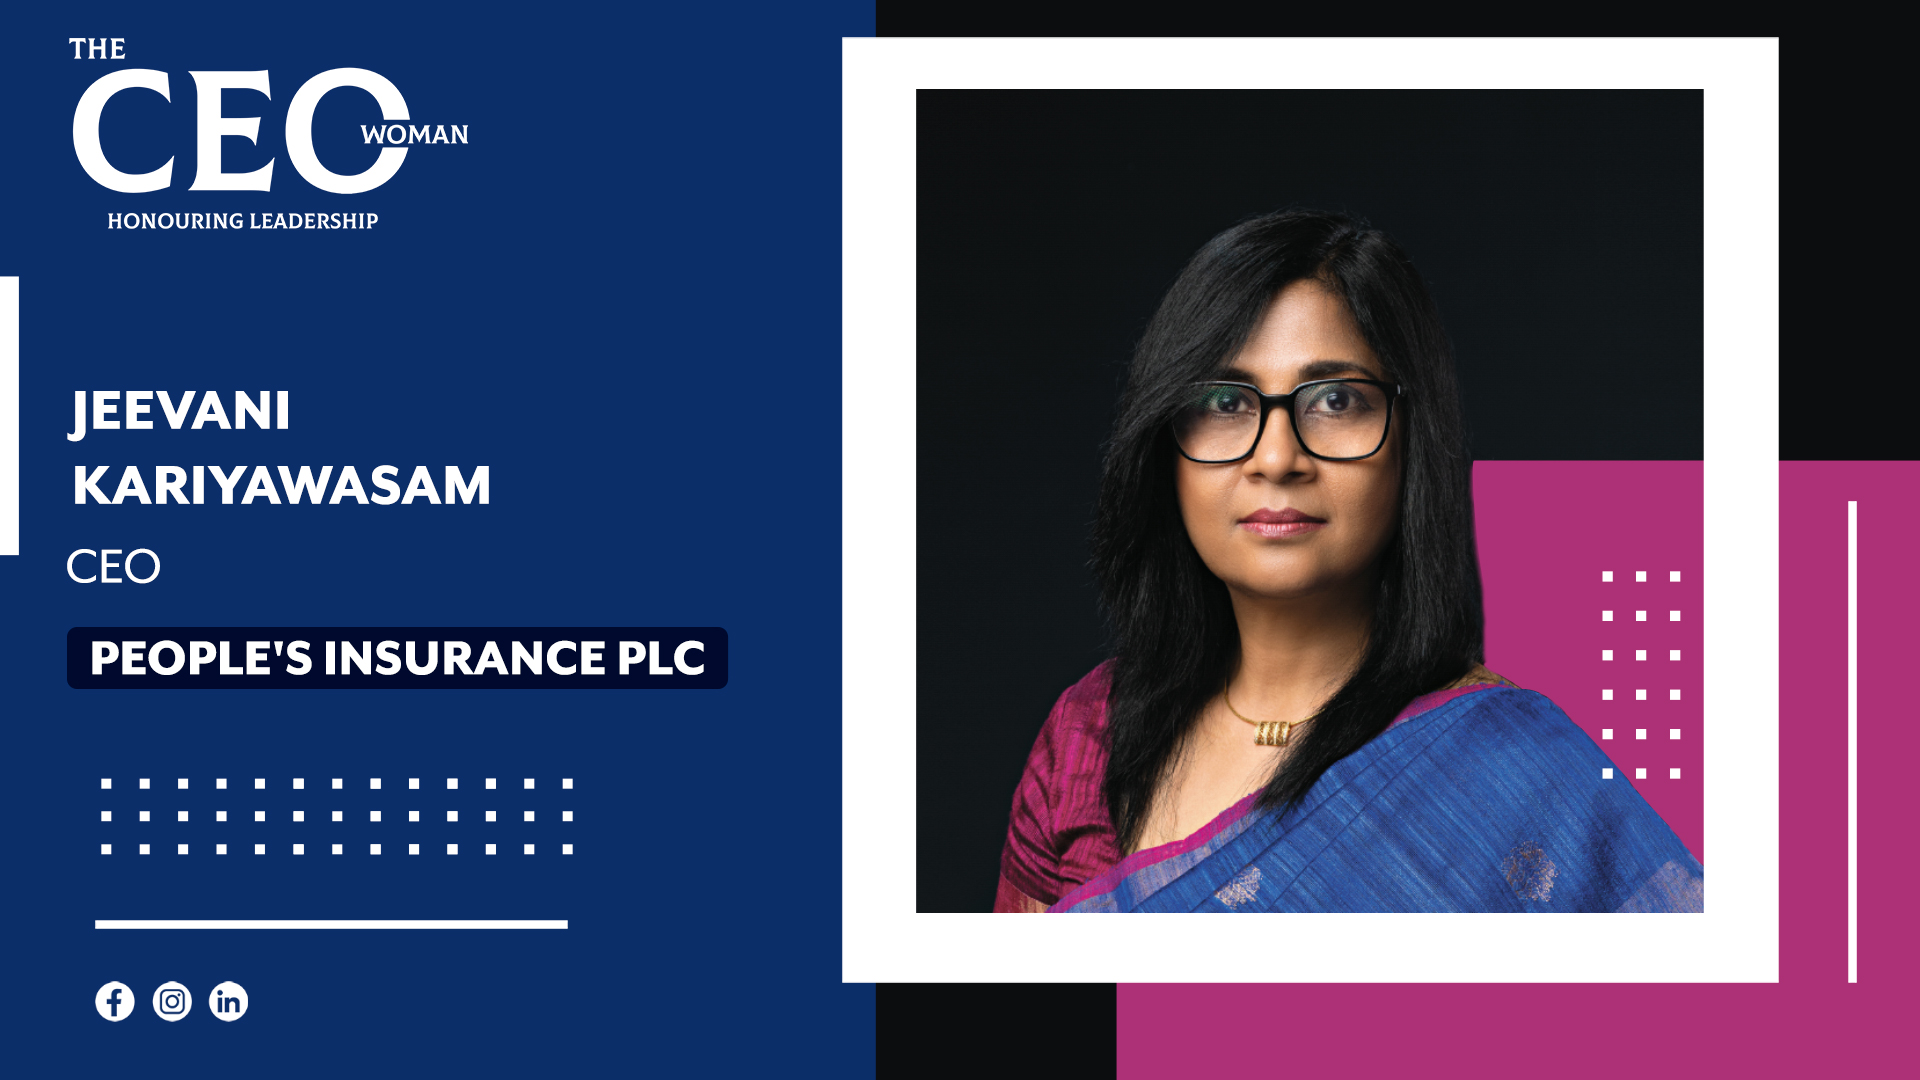 Jeevani Kariyawasam’s Journey to Becoming CEO of People’s Insurance PLC and Championing Gender Equality